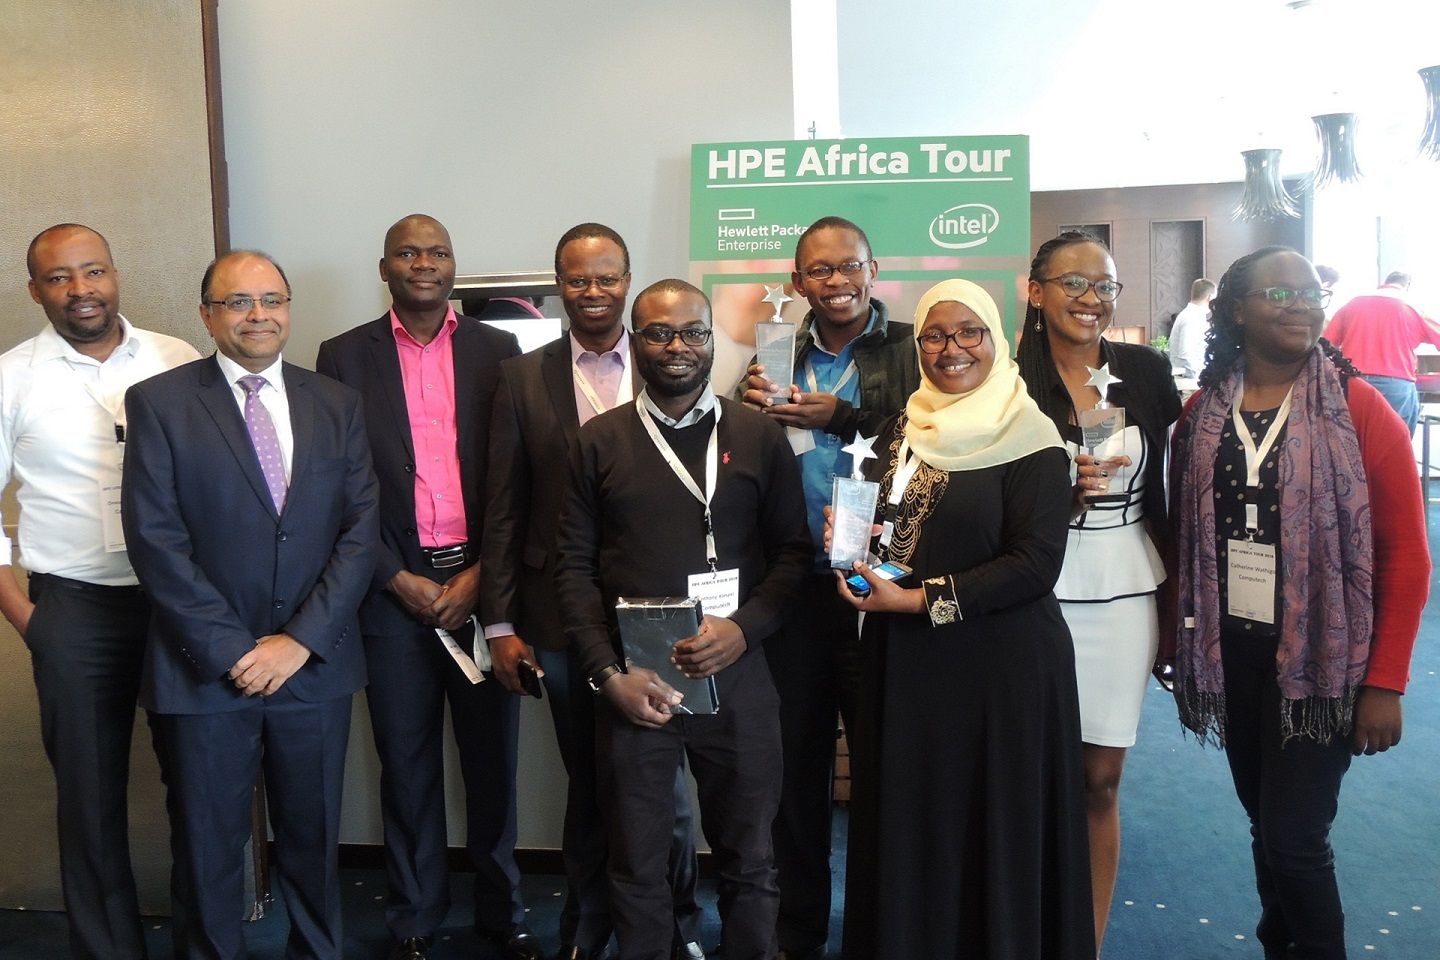 Computech Limited & HPE teams celebrate 3 awards won by Computech during the HPE Africa Tour